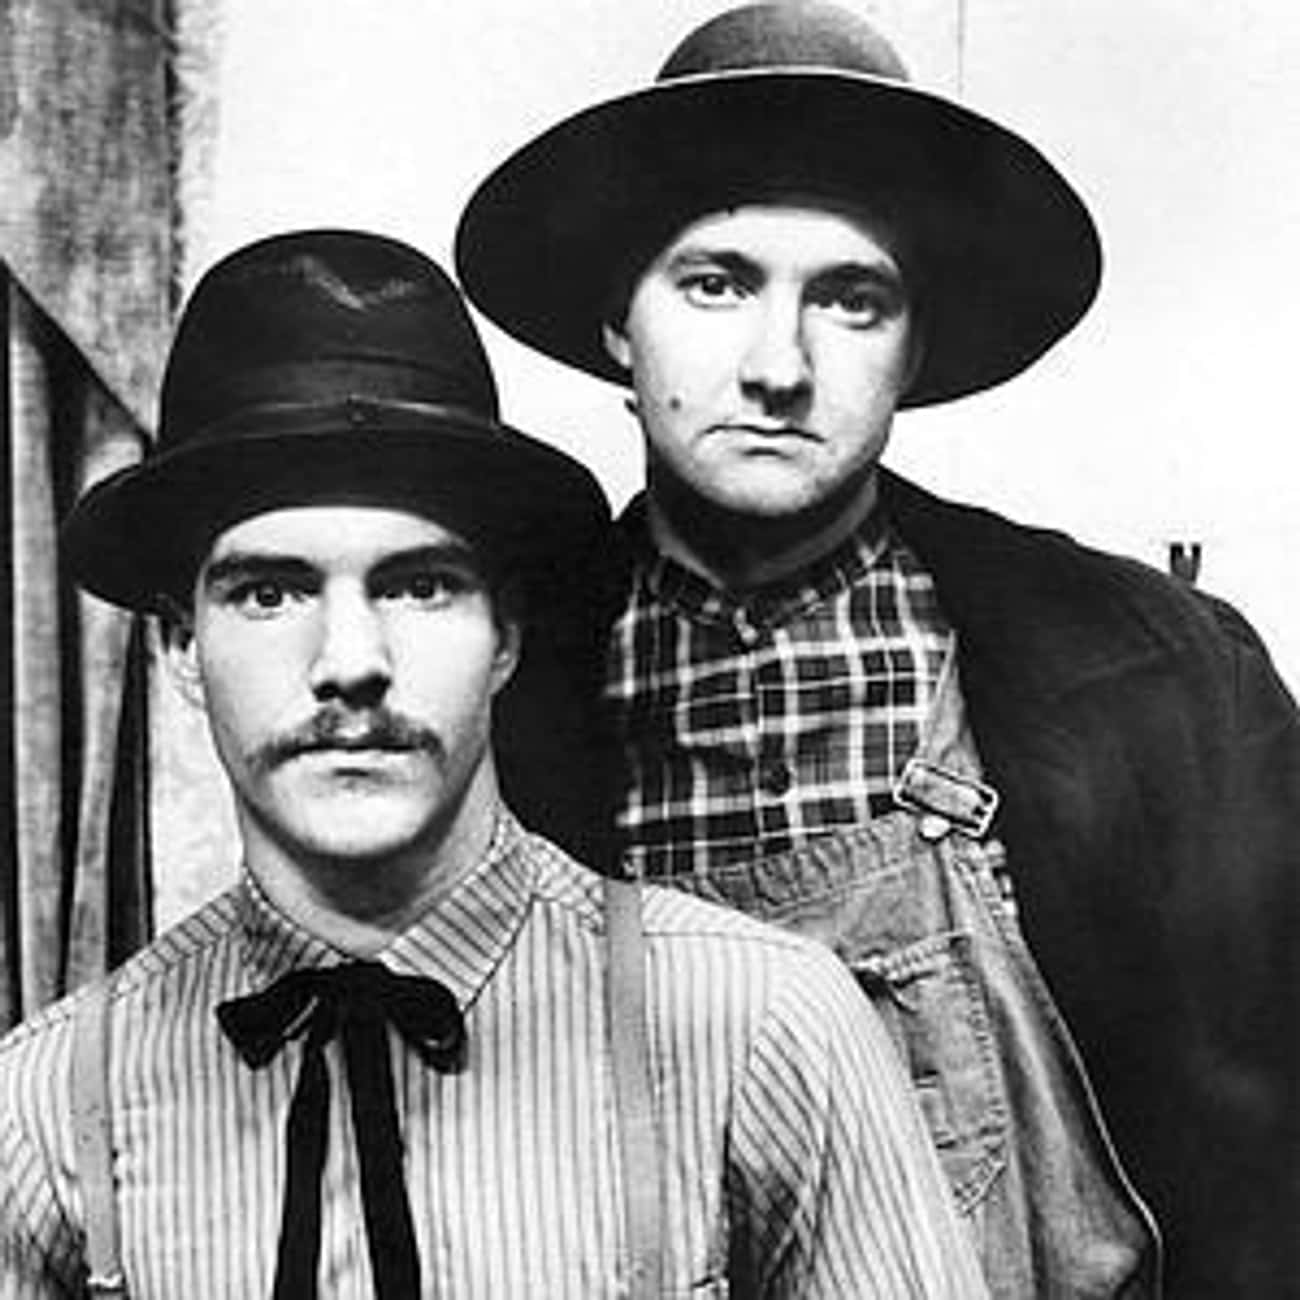 Young Dennis Quaid in Western Attire with Brother Randy